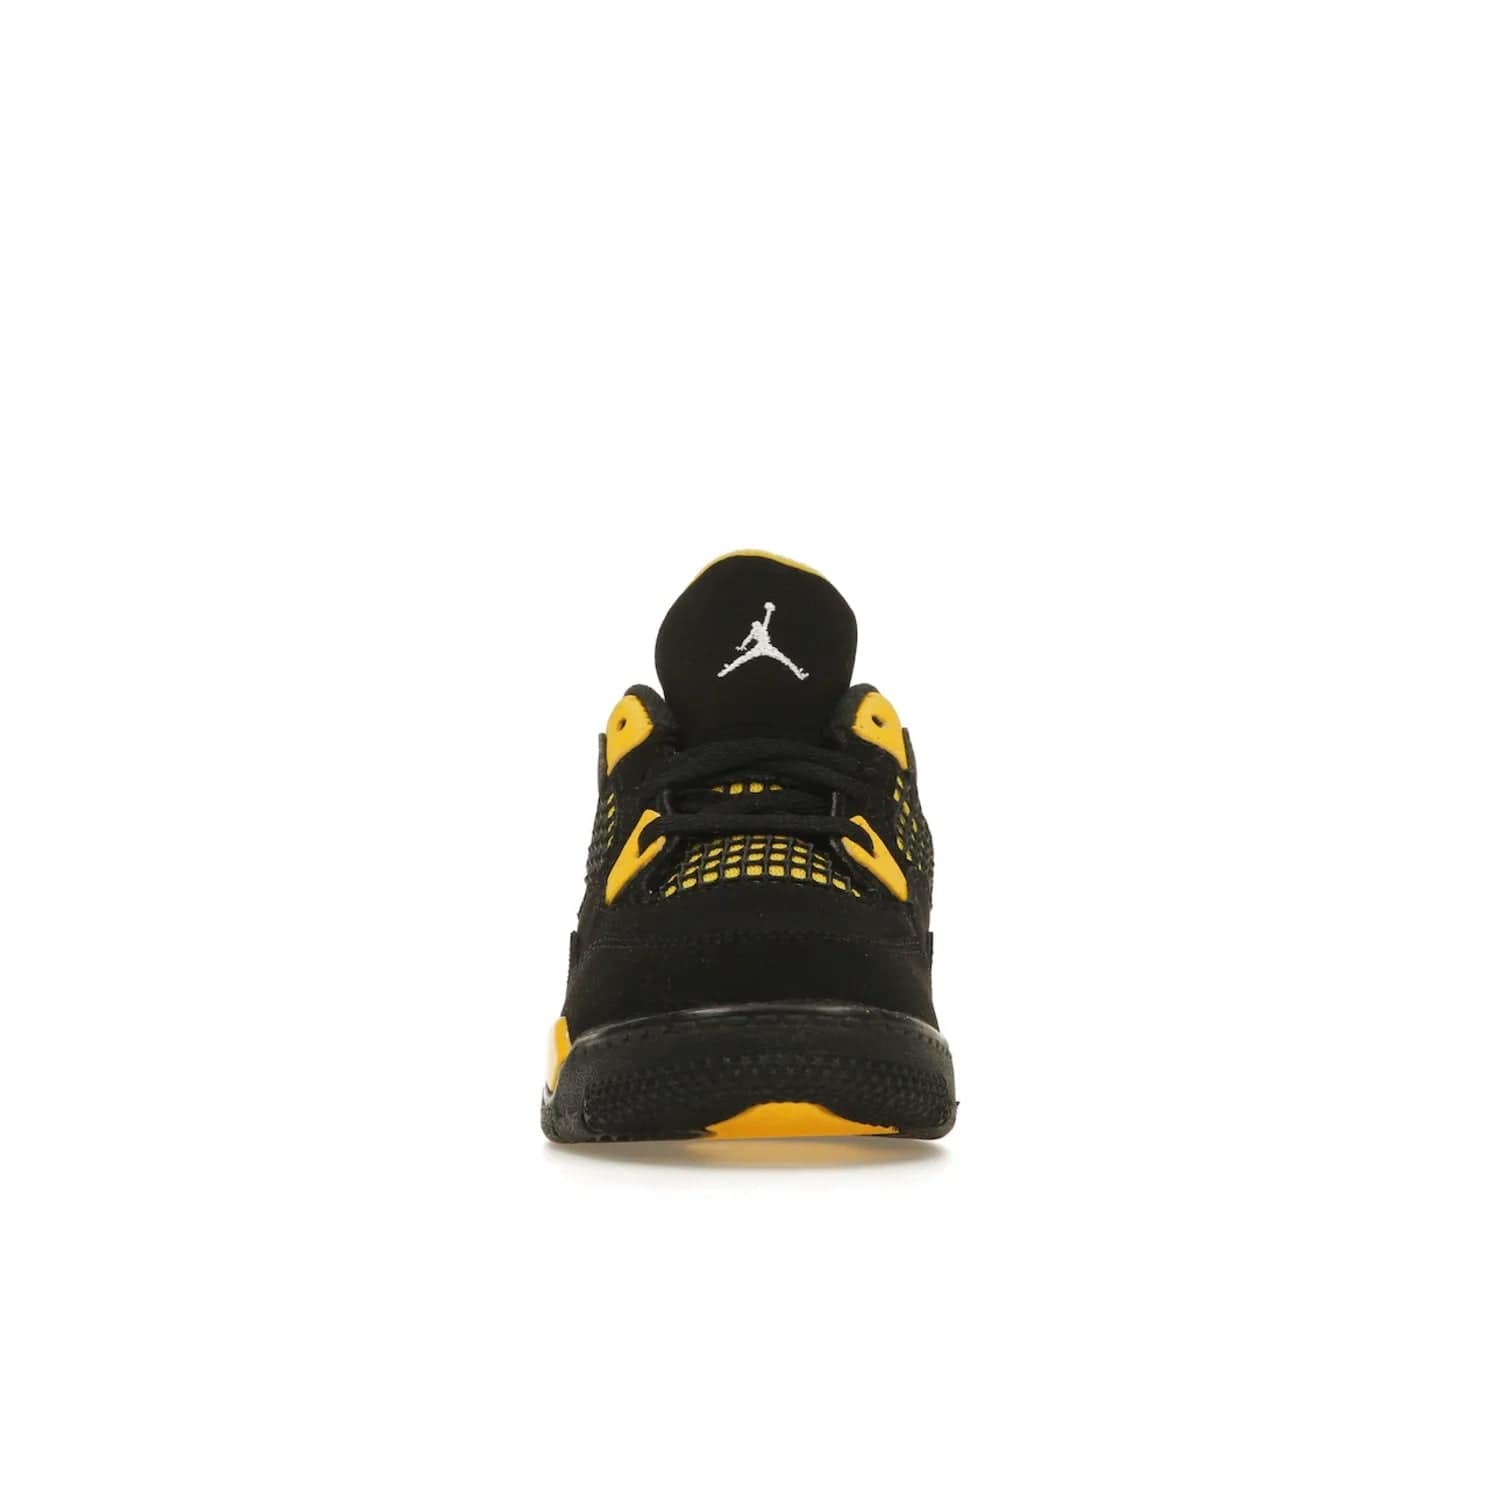 Jordan 4 Retro Thunder (2023) (TD) - Image 10 - Only at www.BallersClubKickz.com - Introducing the Jordan 4 Retro Thunder (2023) (TD): All-Black upper with Tour Yellow accents & Nike Air cushioning. Releasing in 2023.